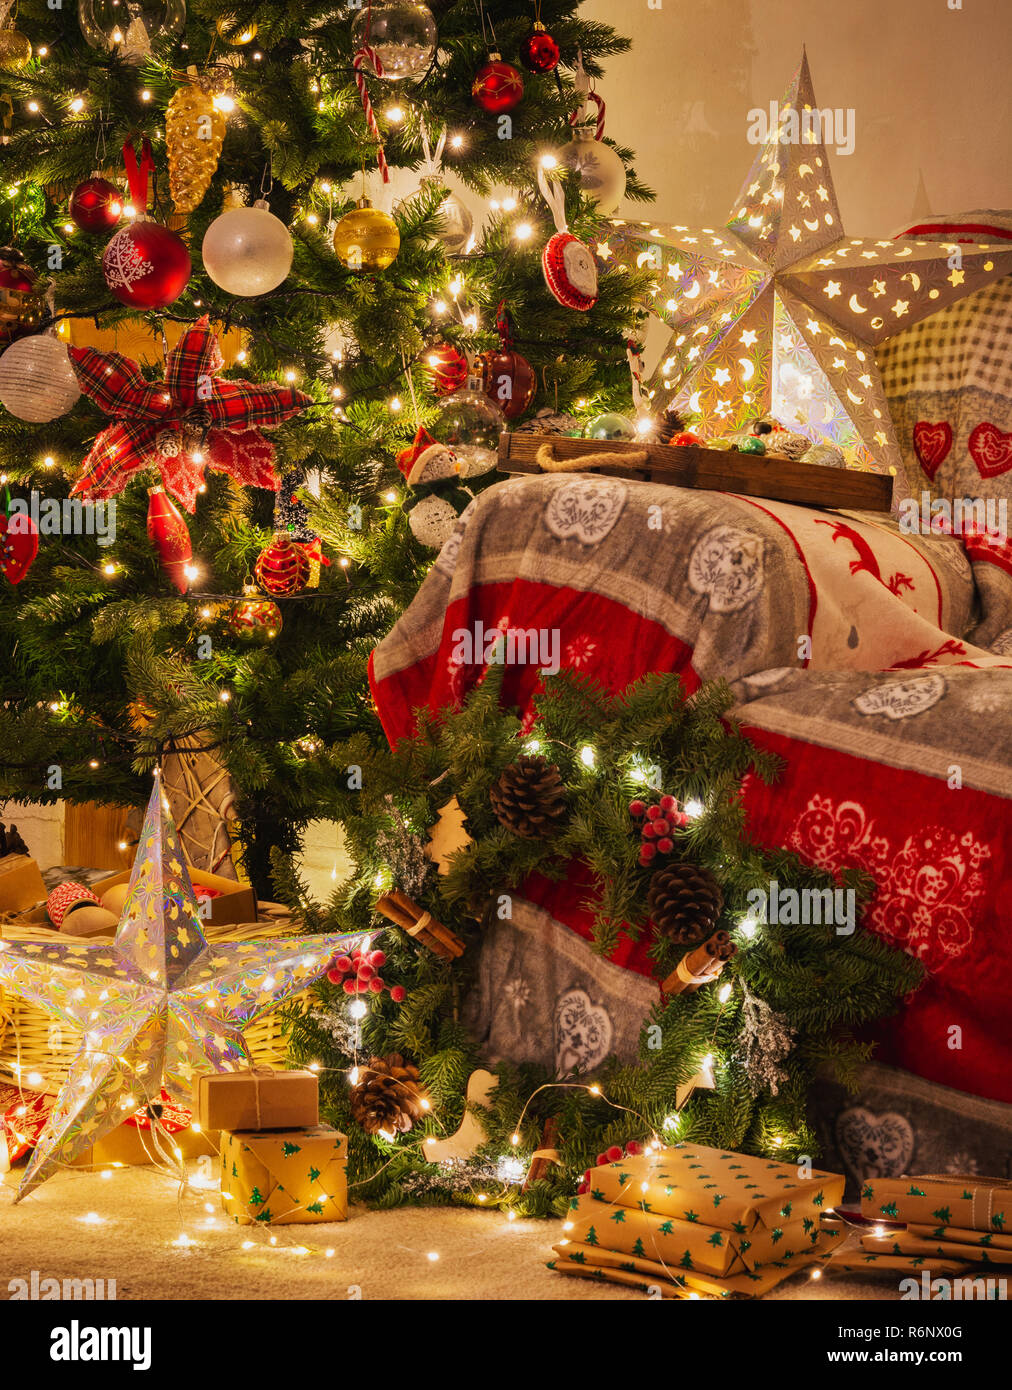 Christmas living room, decorated fireplace with wood mantelpiece, lit up Christmas tree with baubles, stars, pine cones, cosy armchair with read throw Stock Photo